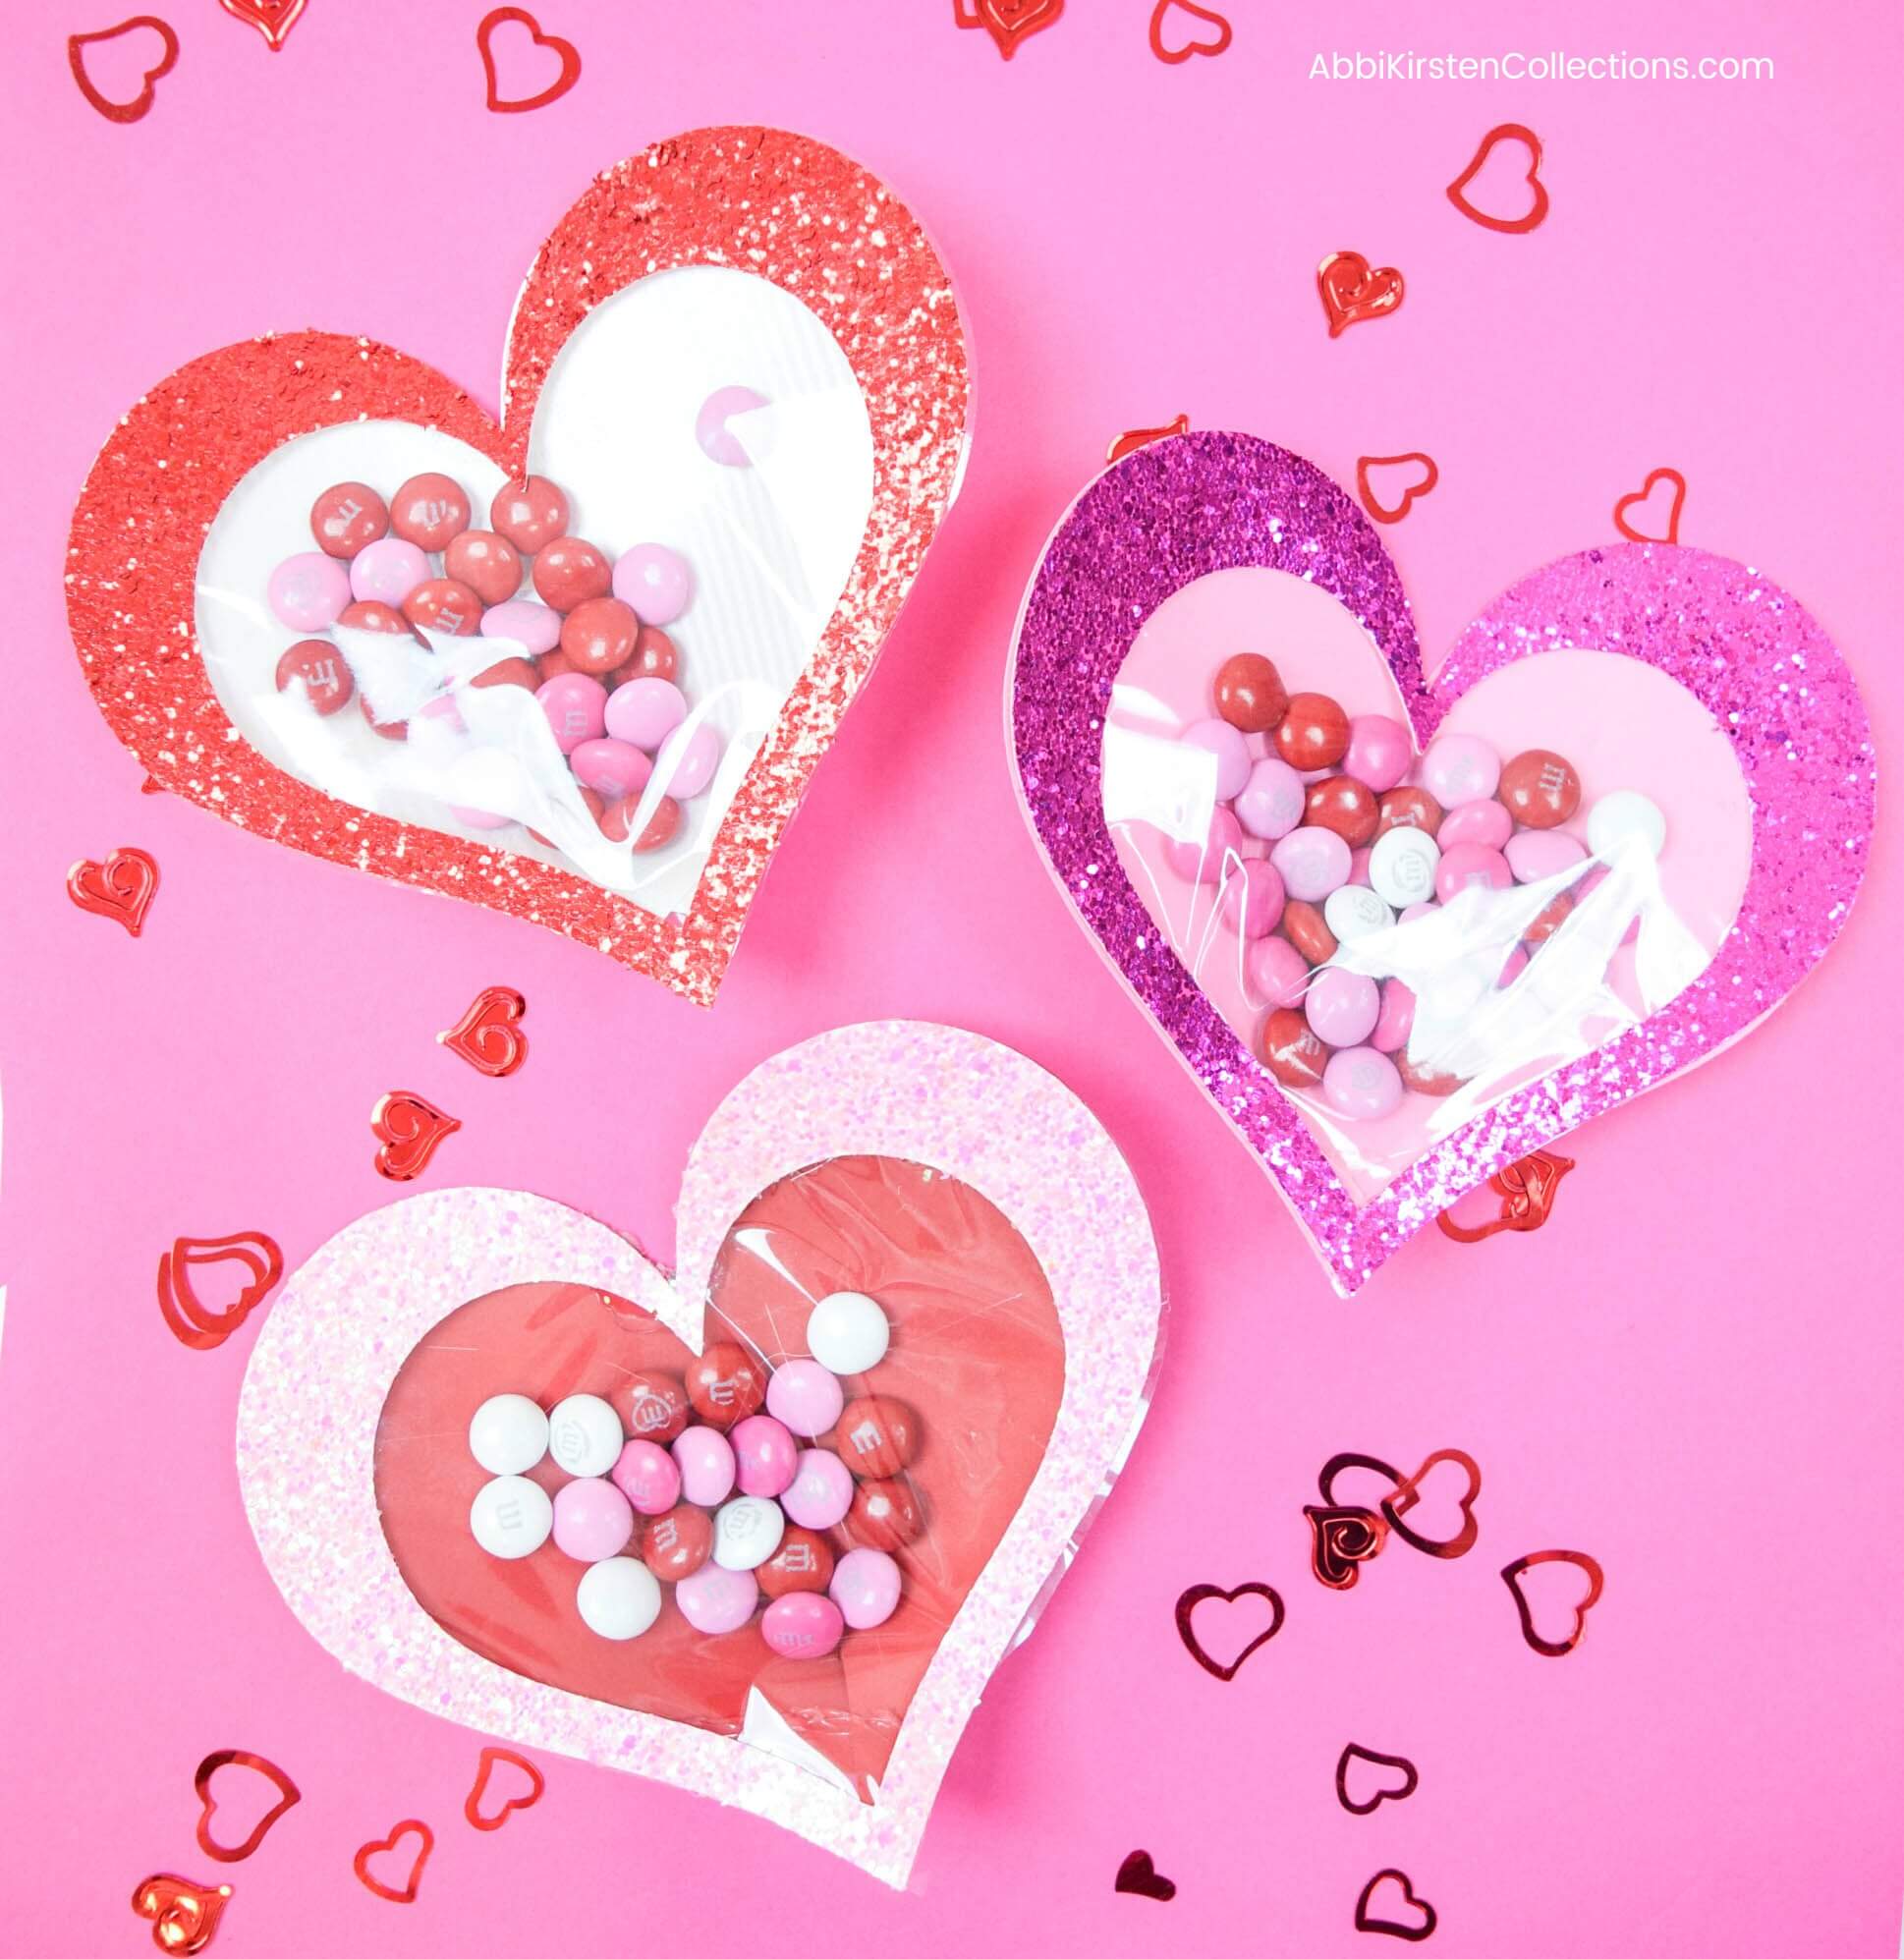 Candy-Filled Hearts: Easy Valentine’s Craft with Free SVG and Tutorial